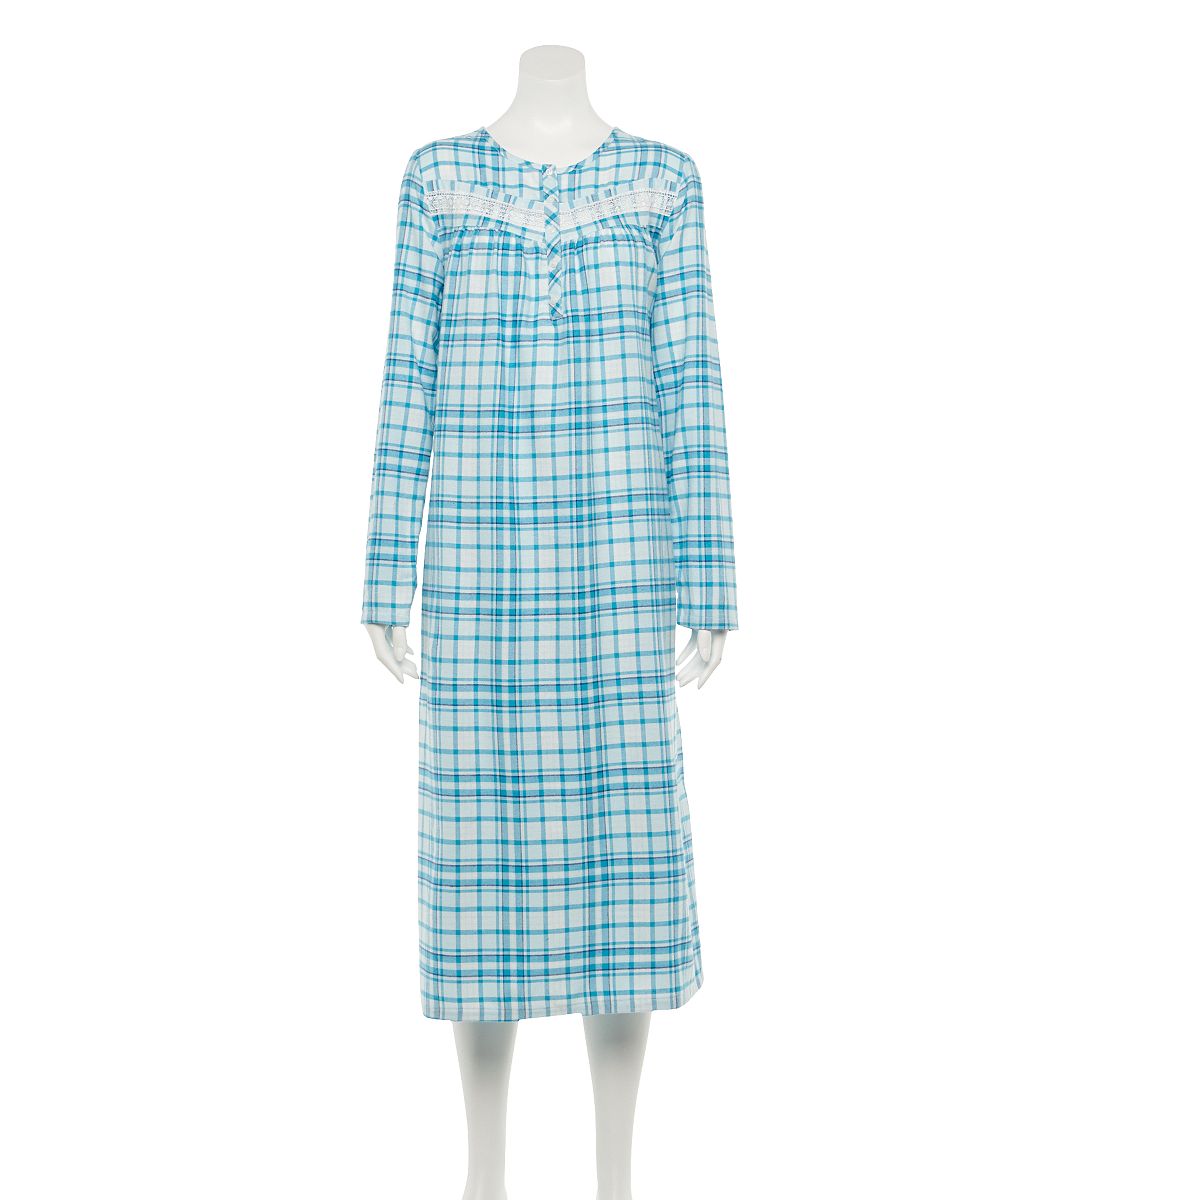 Flannel Nightgowns: Get Comfy and Cozy in Flannel Nightgowns